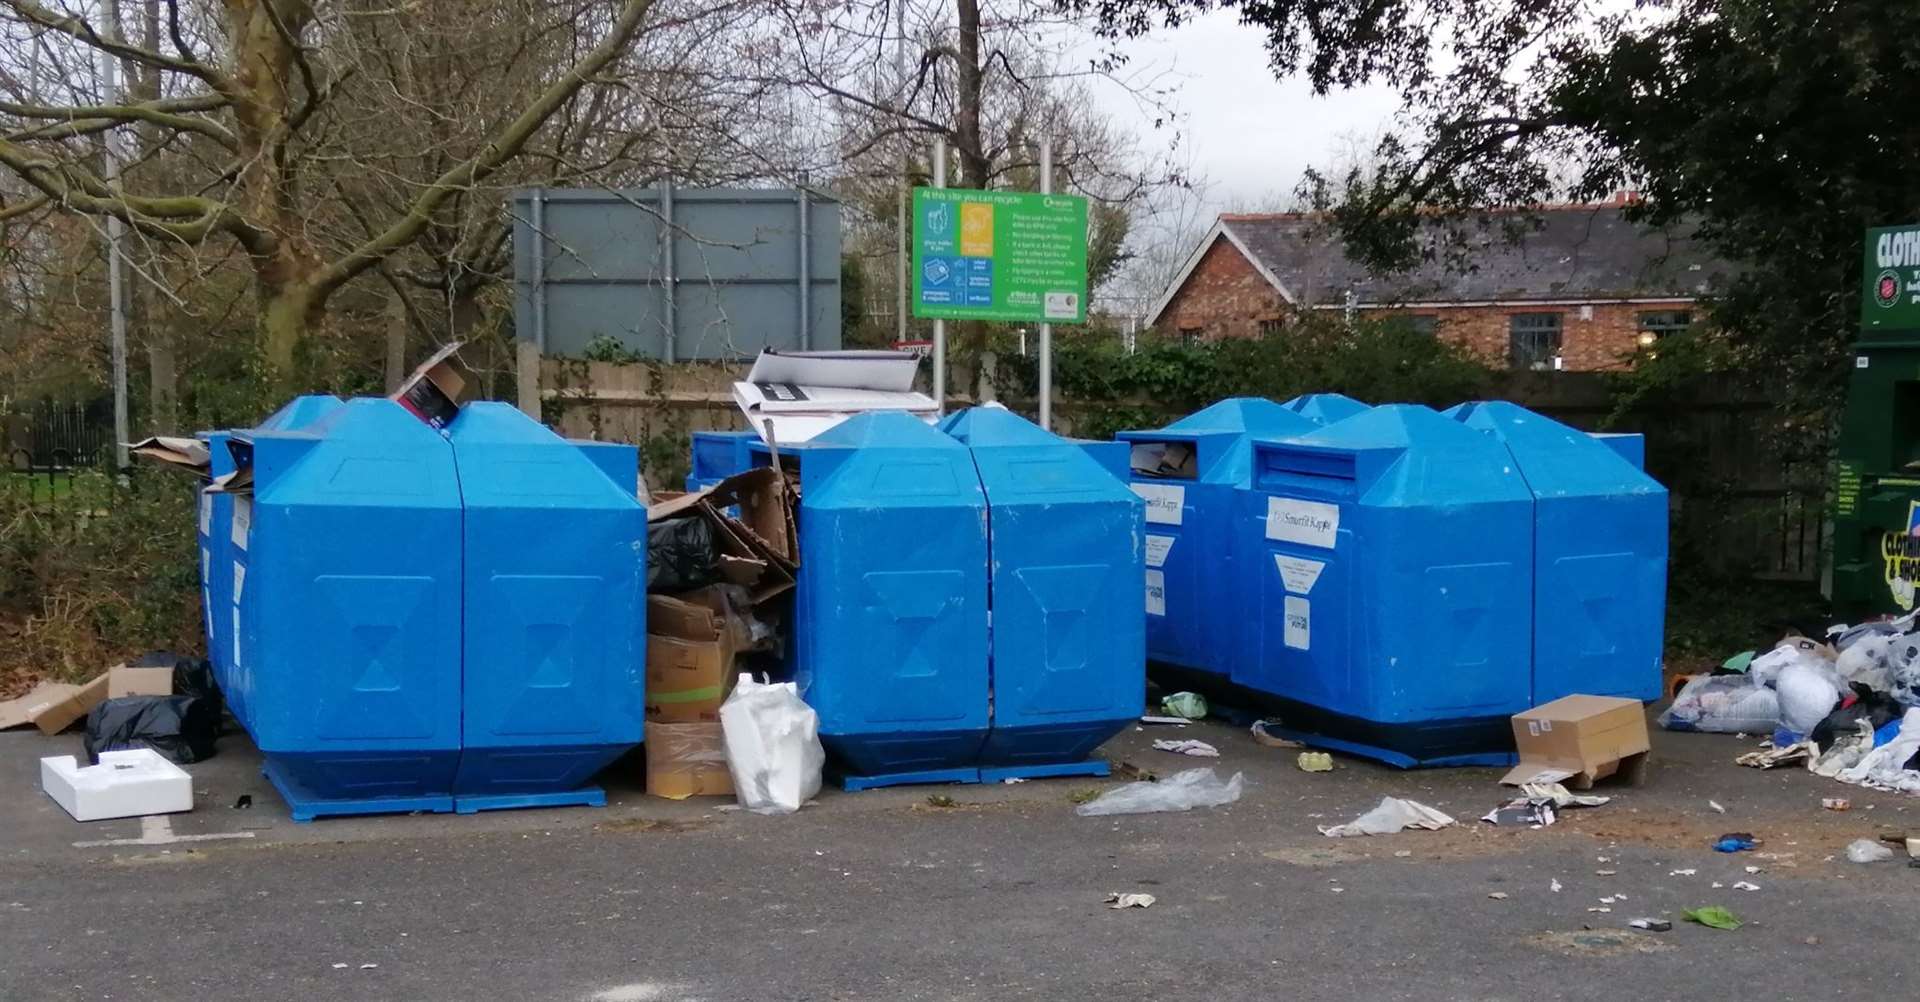 Fly-tipping in the Sevenoaks area by bottle banks